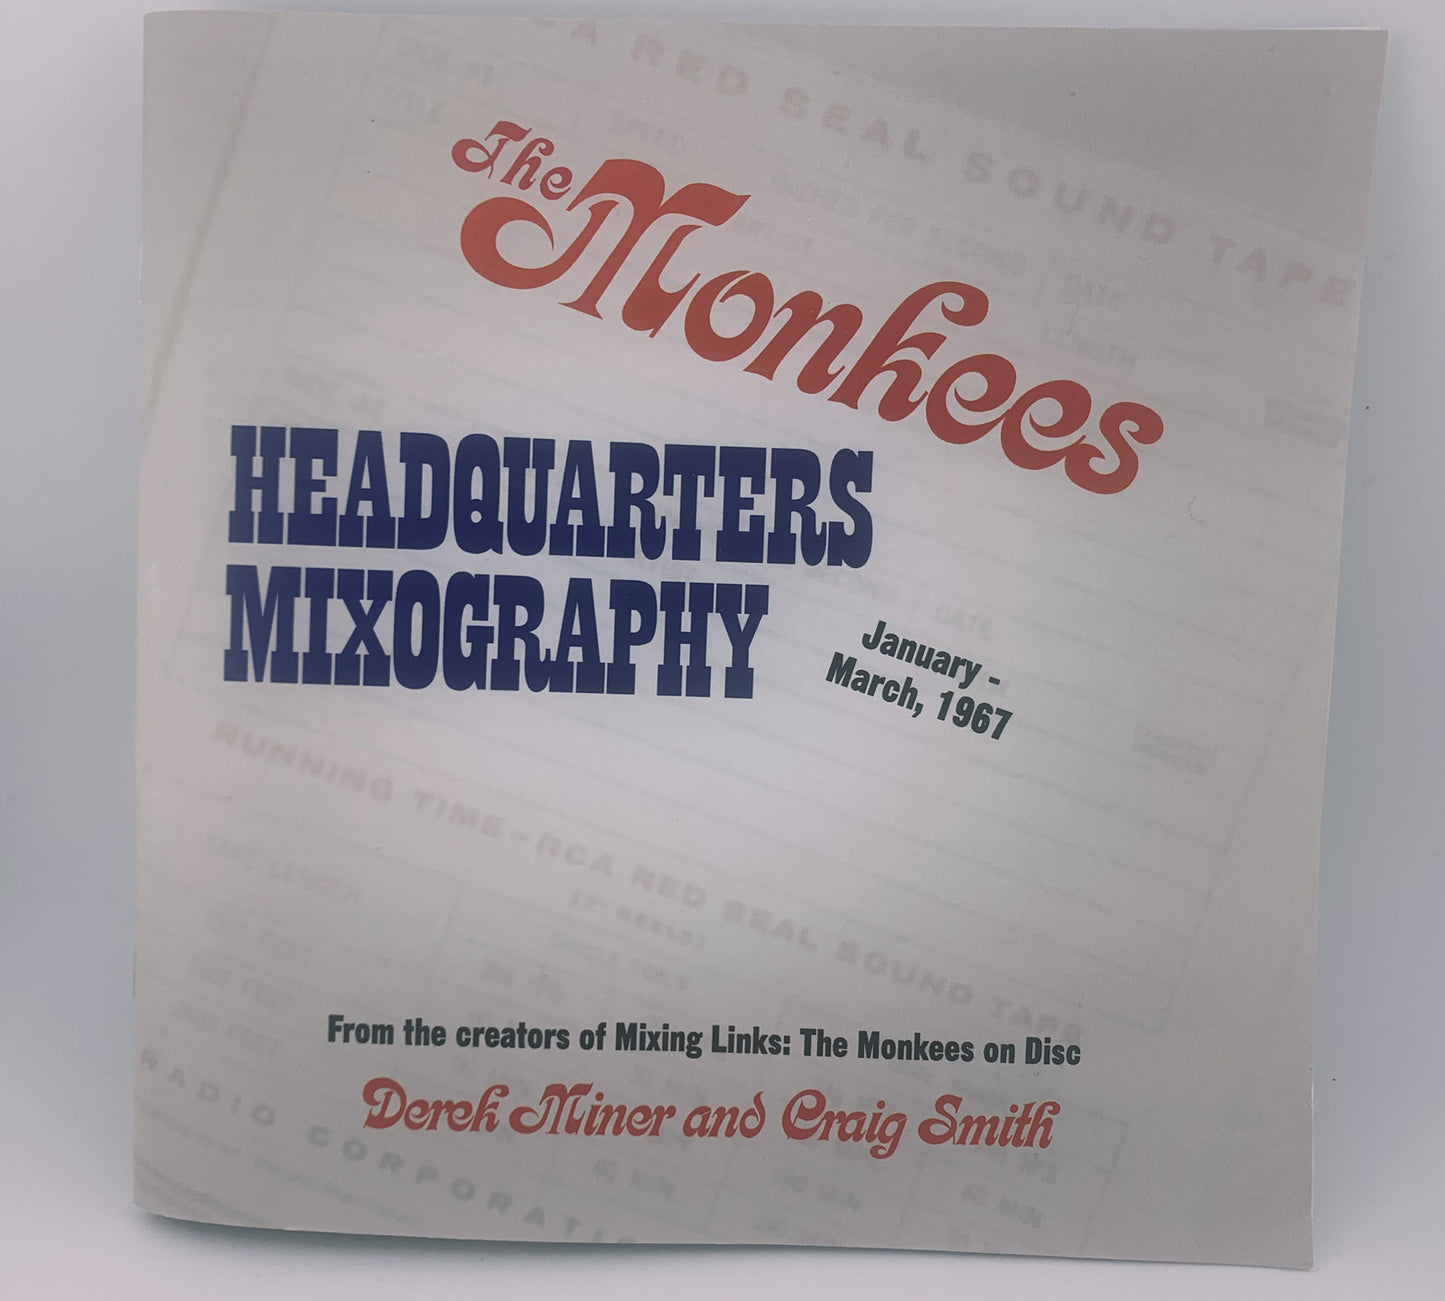 Headquarters Mixography physical booklet